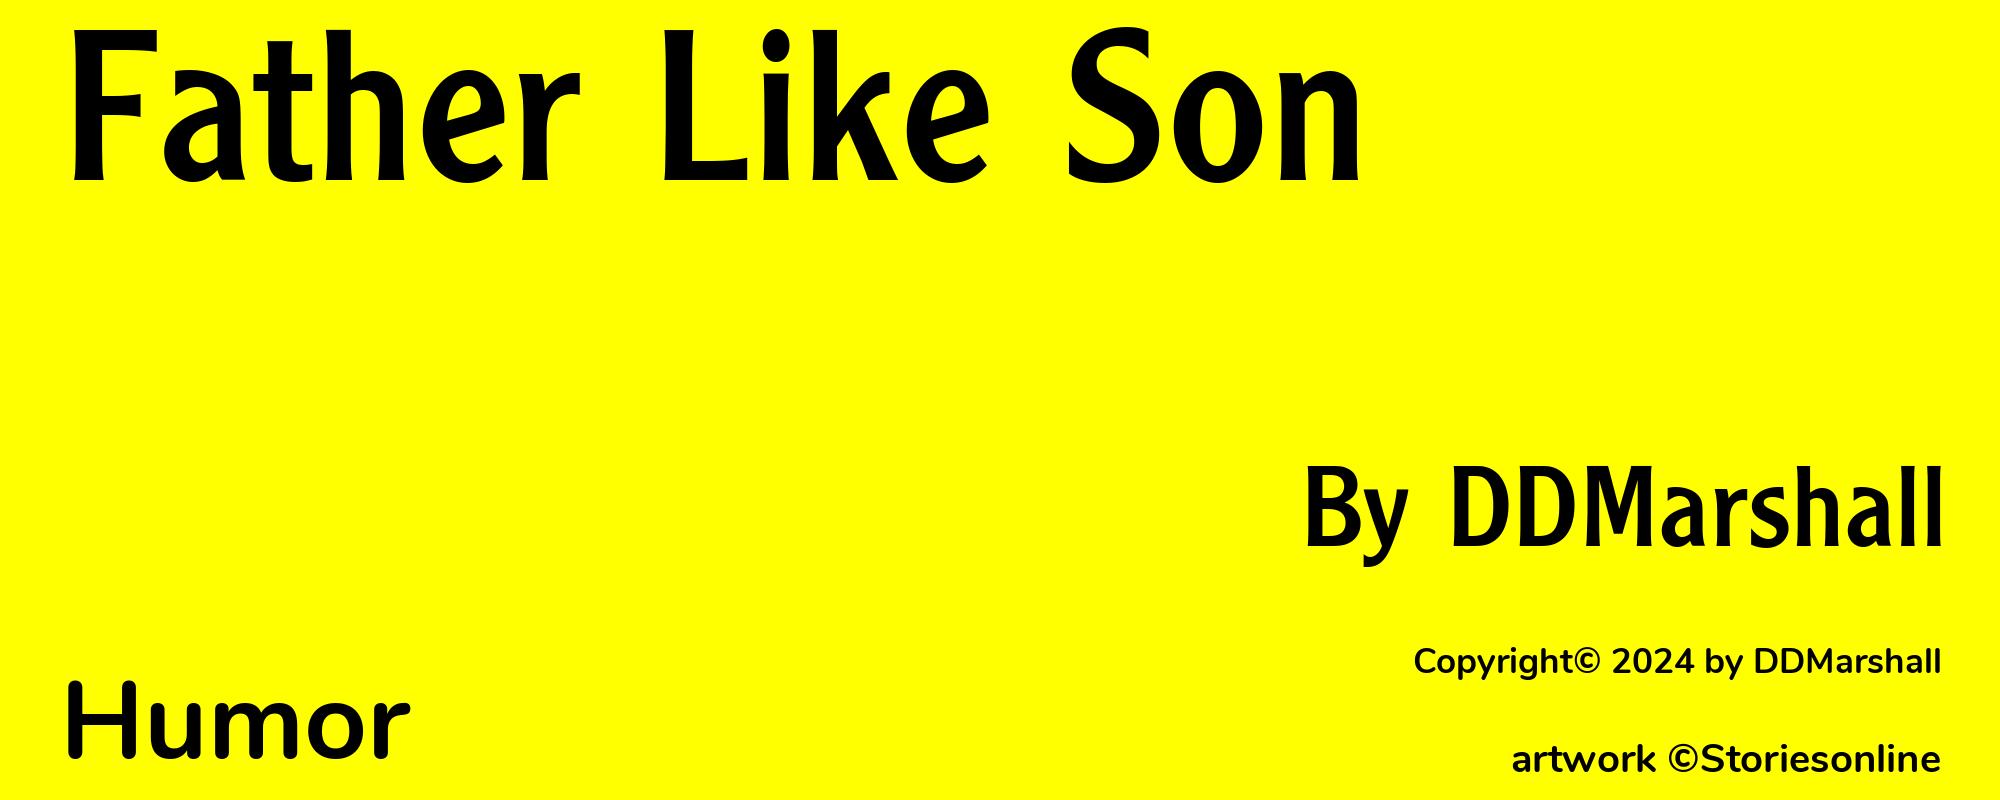 Father Like Son - Cover